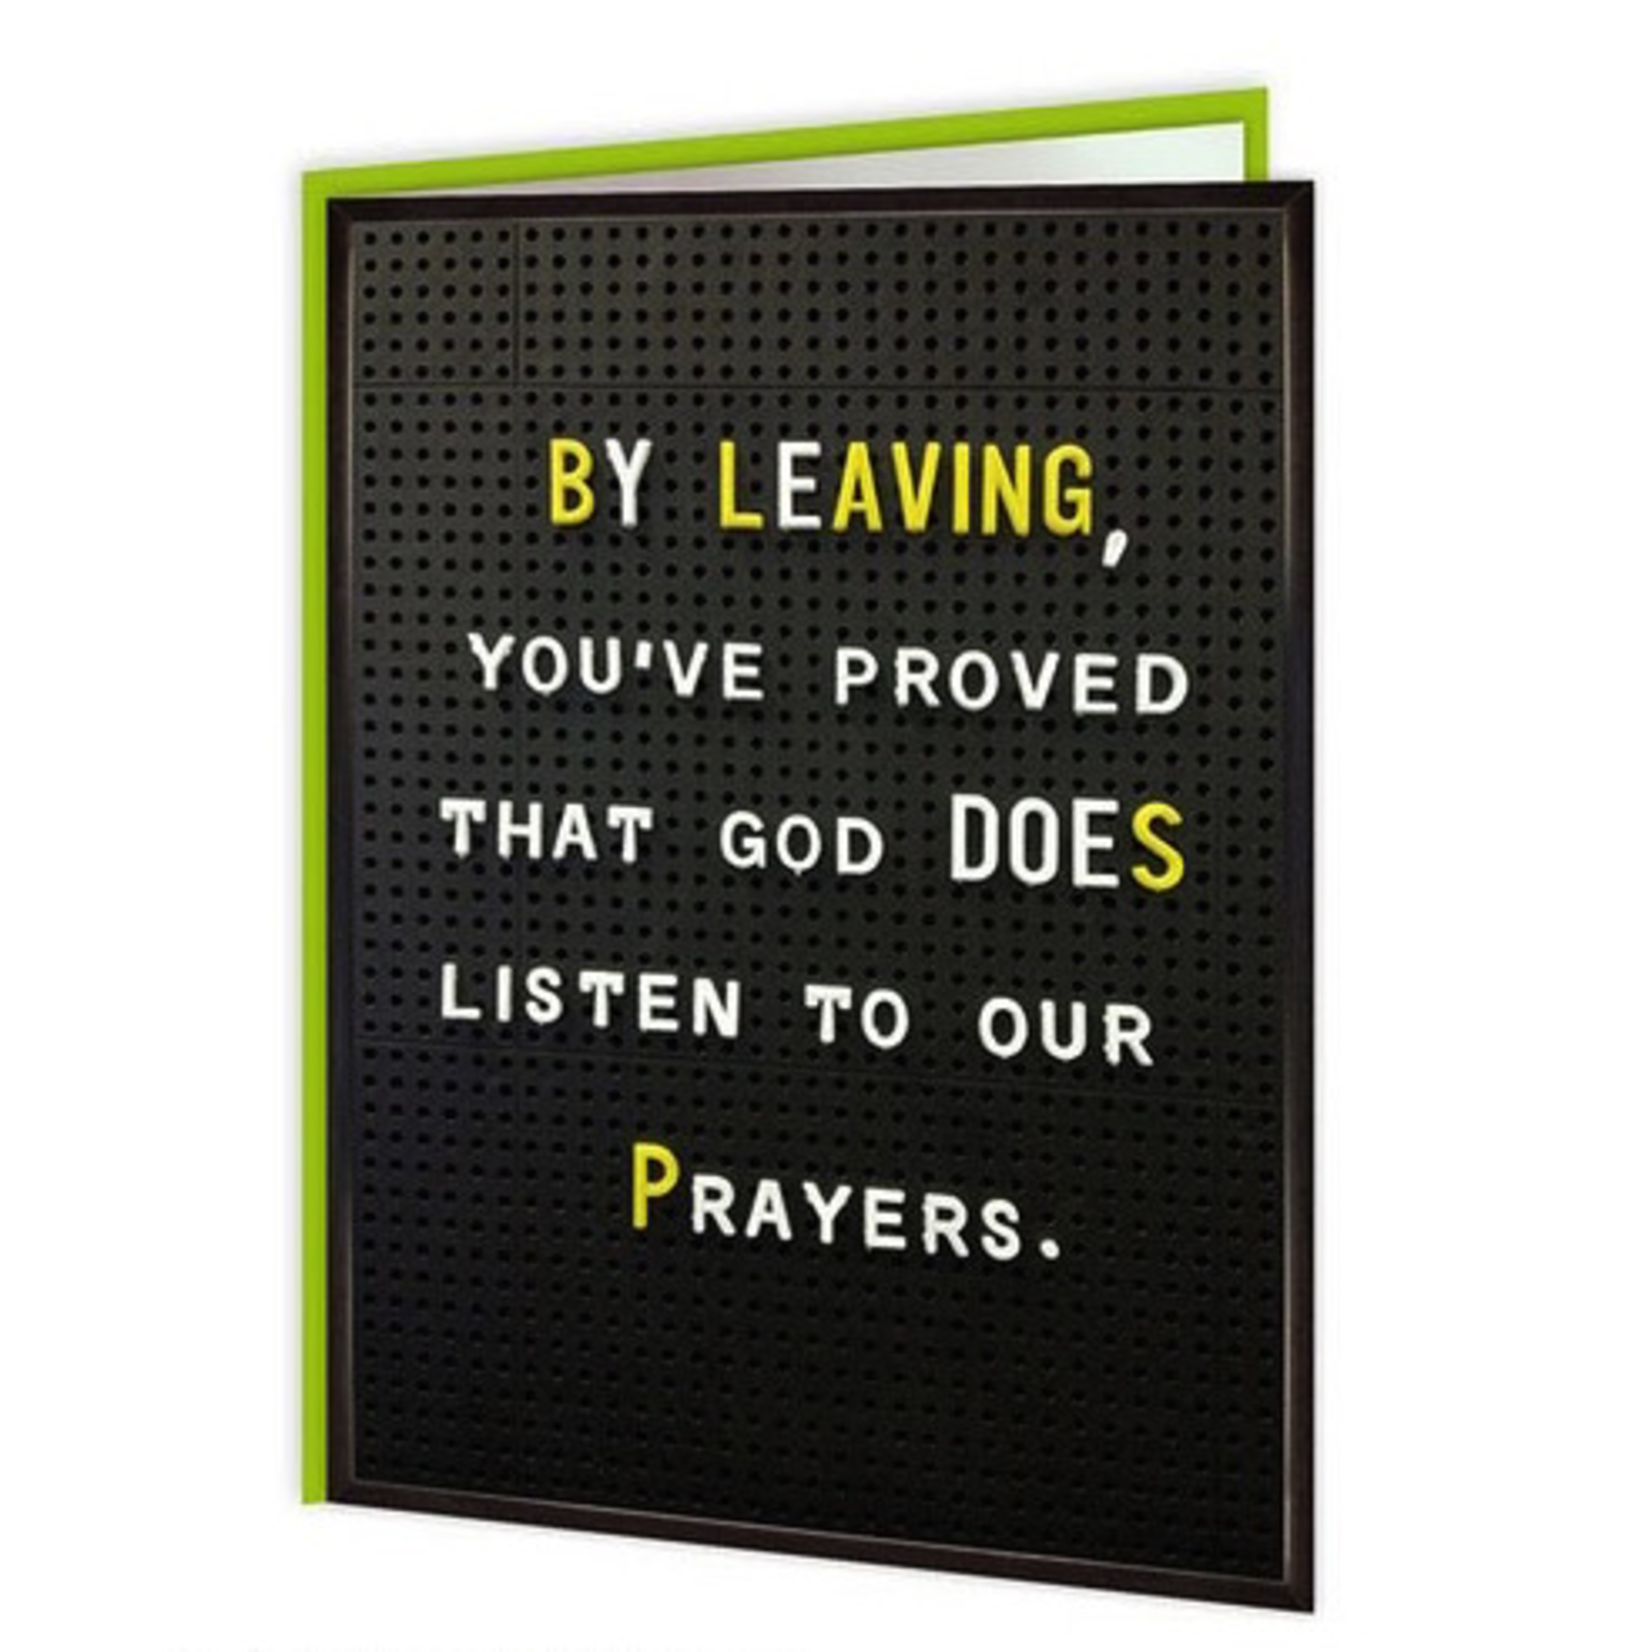 God Does Listen to our Prayers Card